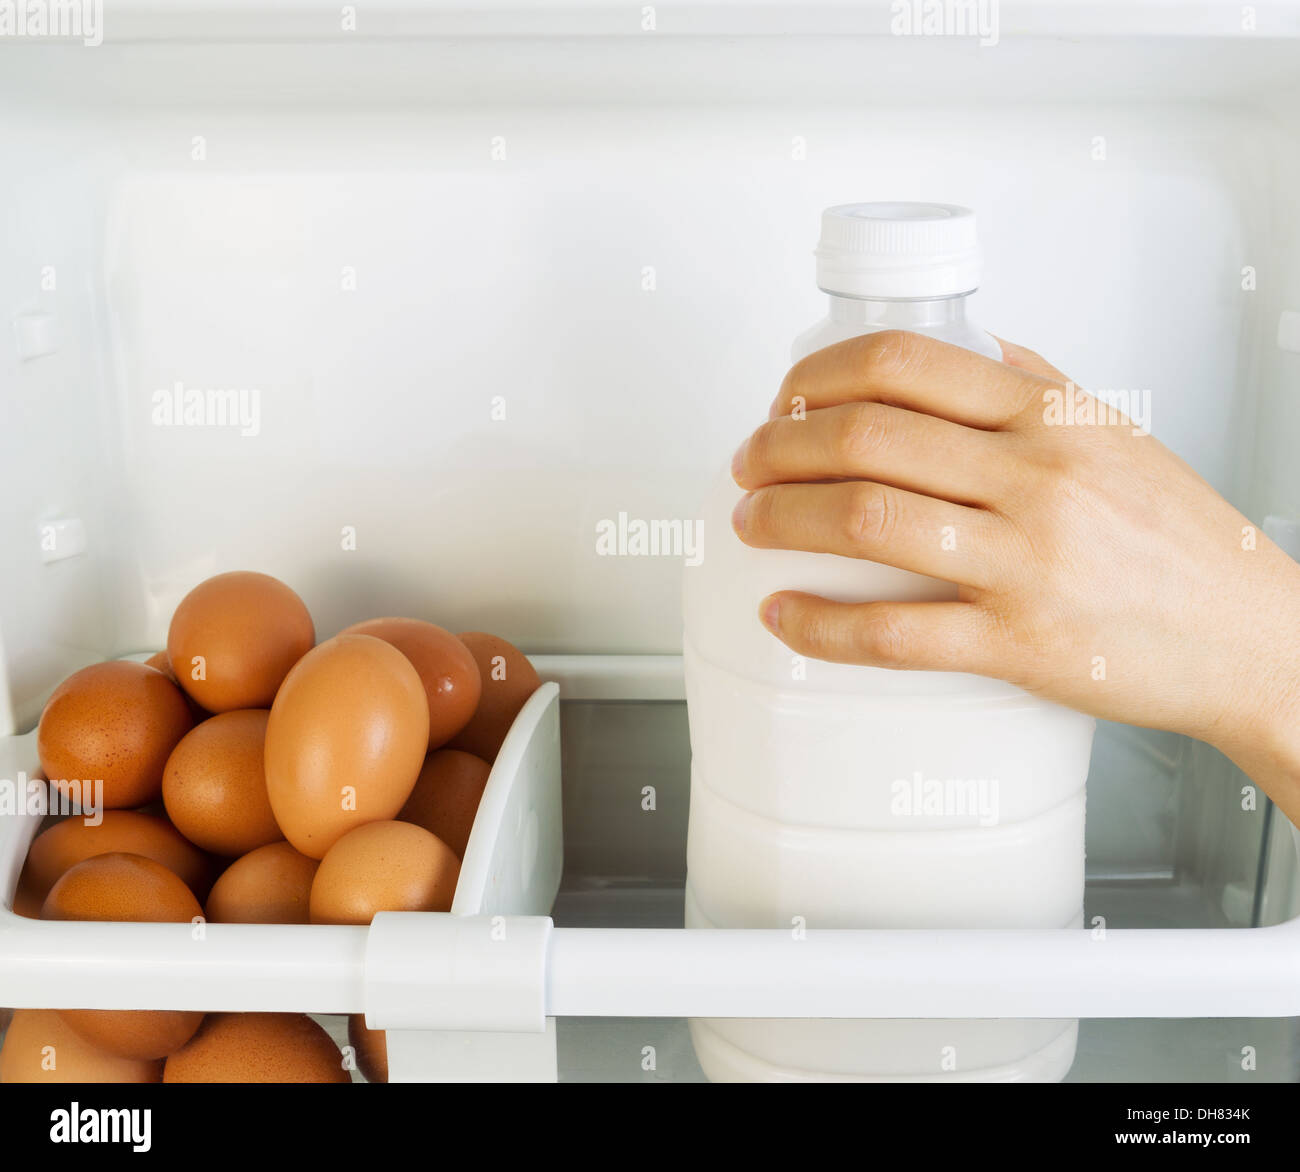 Photo of female hand grabbing milk container off of refrigerator door shelf with organic eggs off to the side Stock Photo